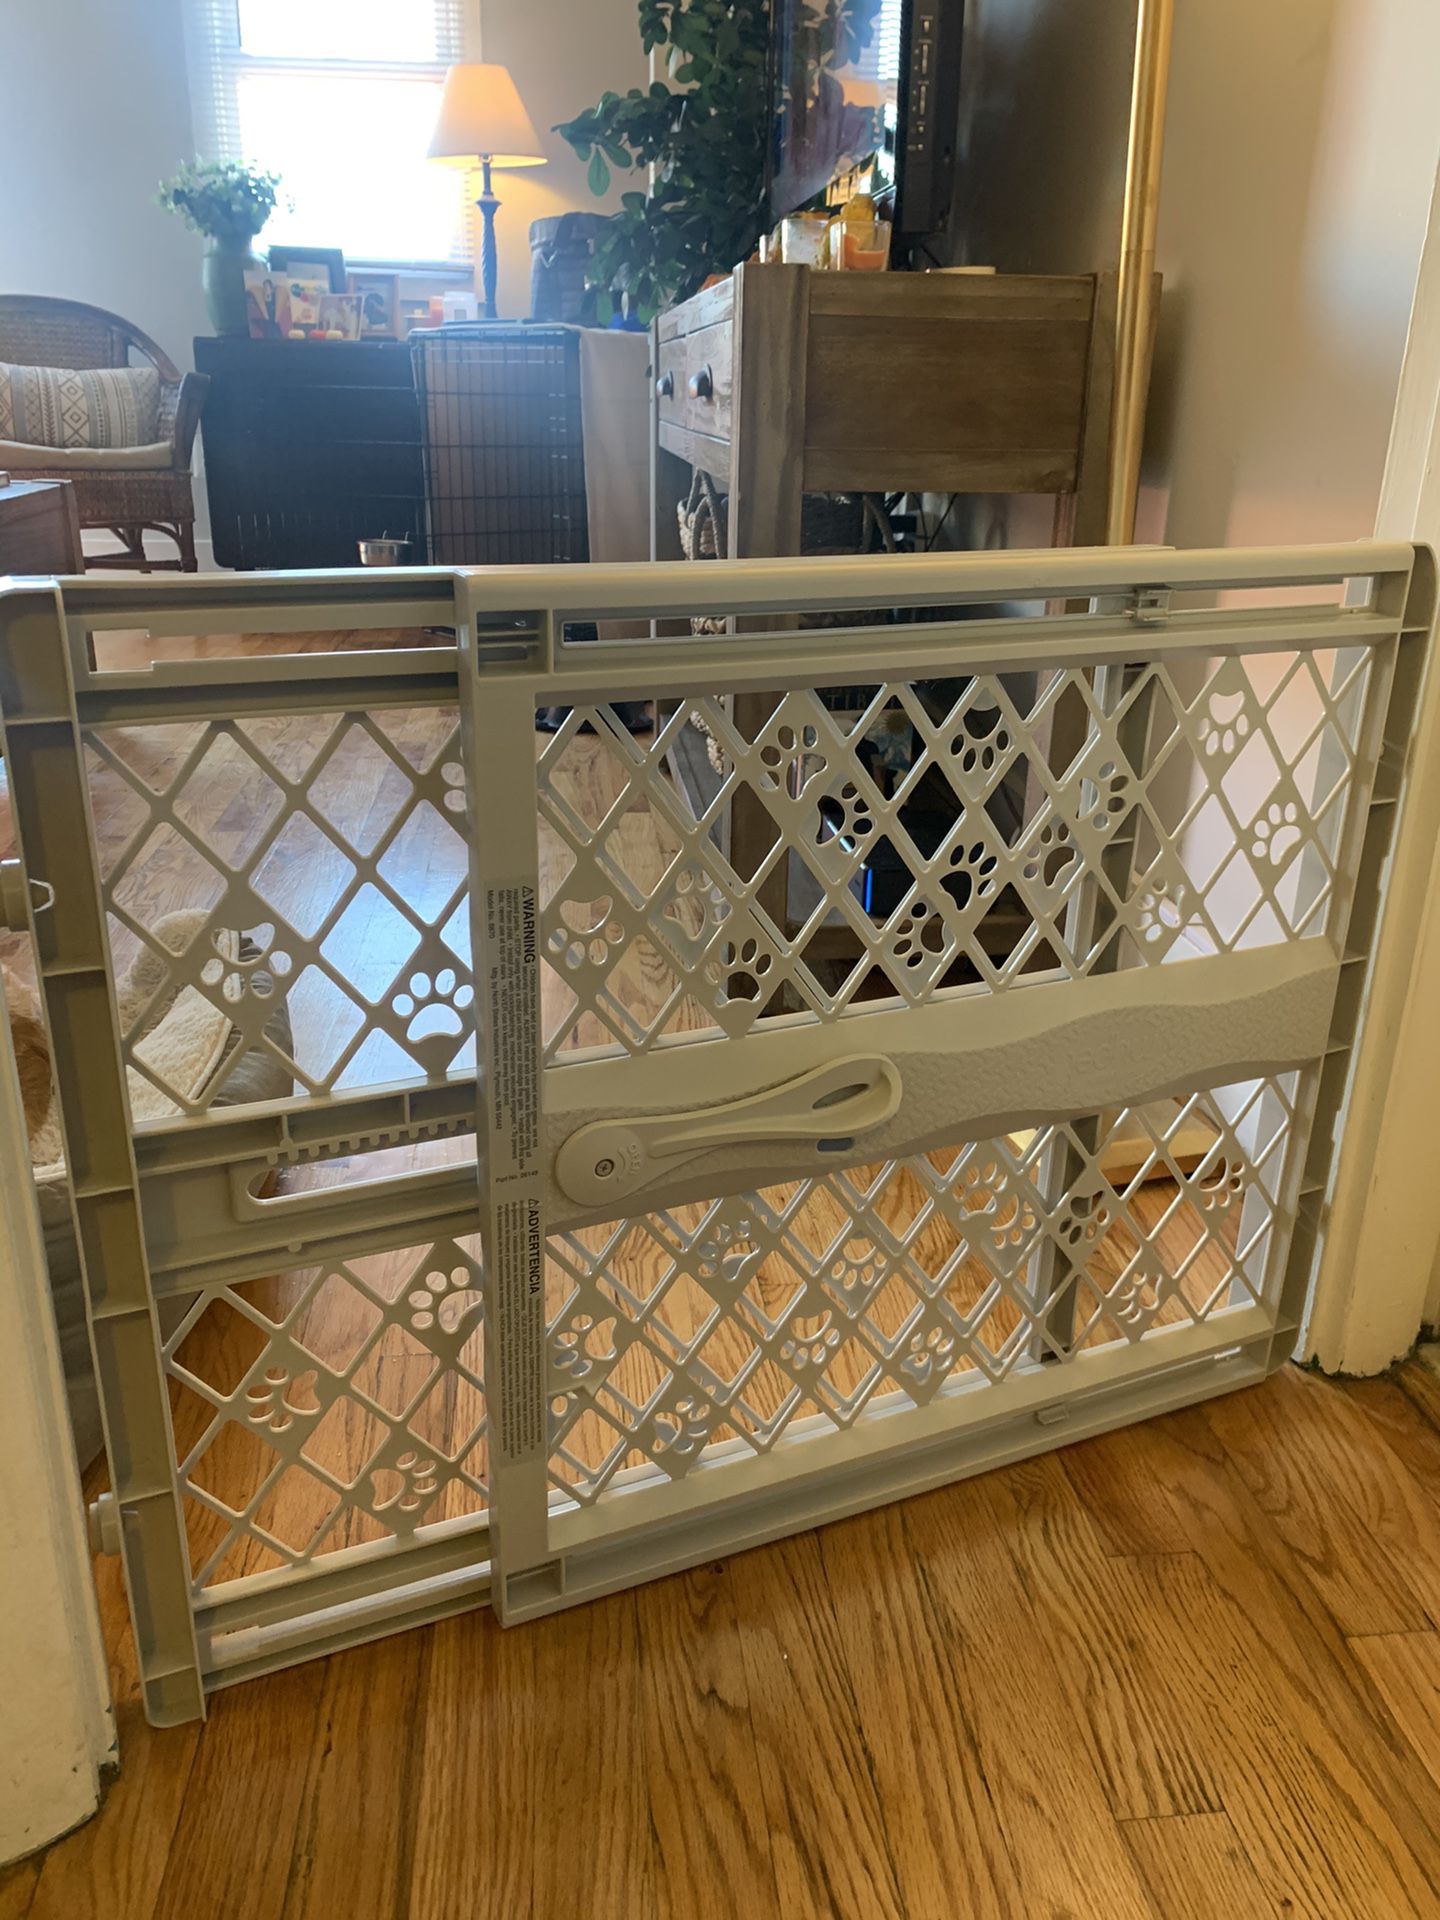 Pet or Baby Gate